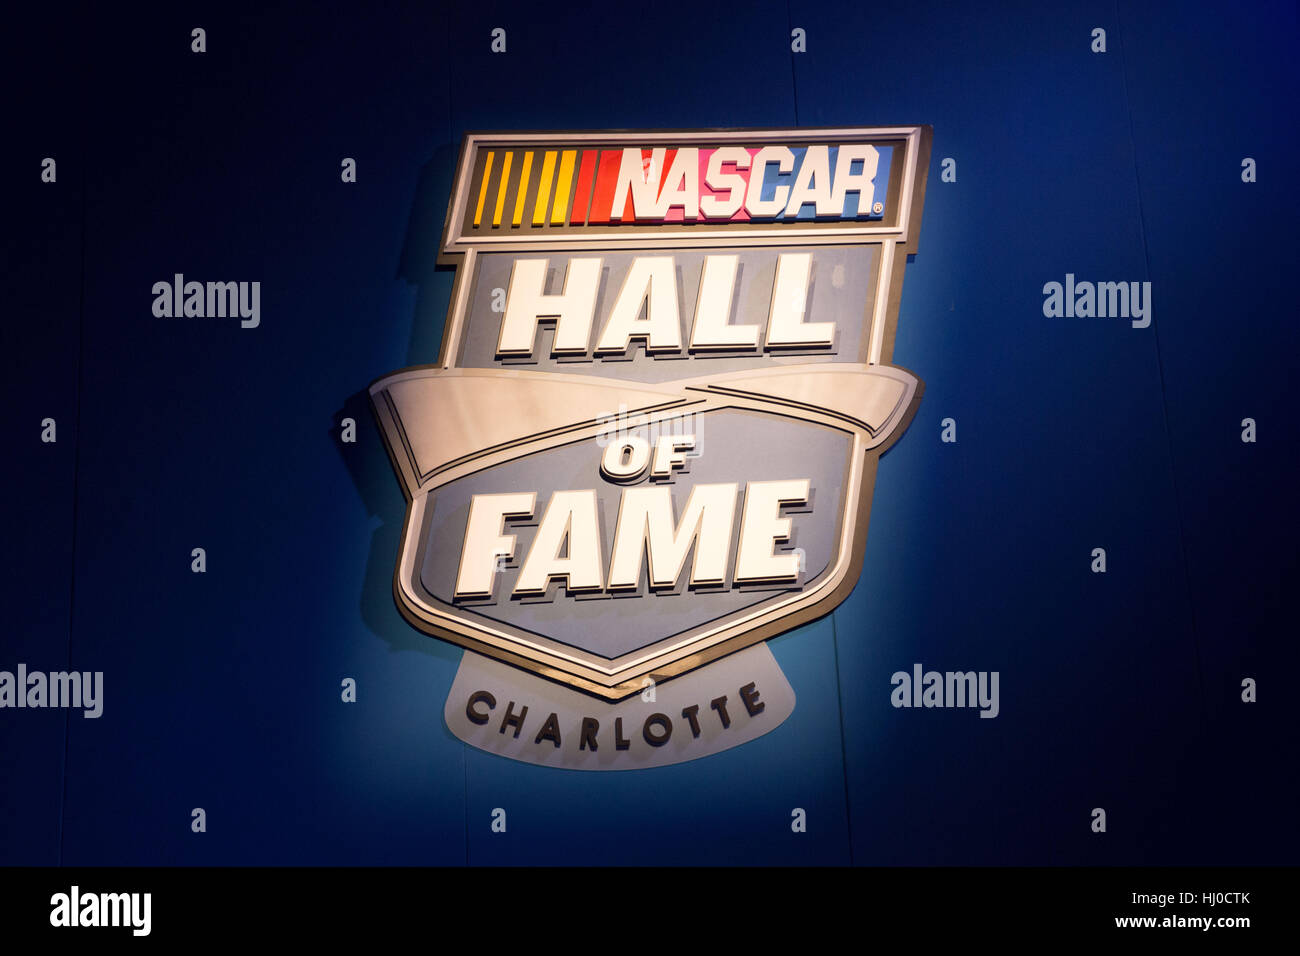 Charlotte, USA. 20th Jan, 2017. NASCAR Hall of Fame Induction Ceremony on Friday, January 20, 2017, in Charlotte, North Carolina. Richard Childress, Rick Hendrick, Mark Martin, Raymond Parks, and Benny Parsons were inducted into the Hall of Fame. Credit: Jason Walle/ZUMA Wire/Alamy Live News Stock Photo